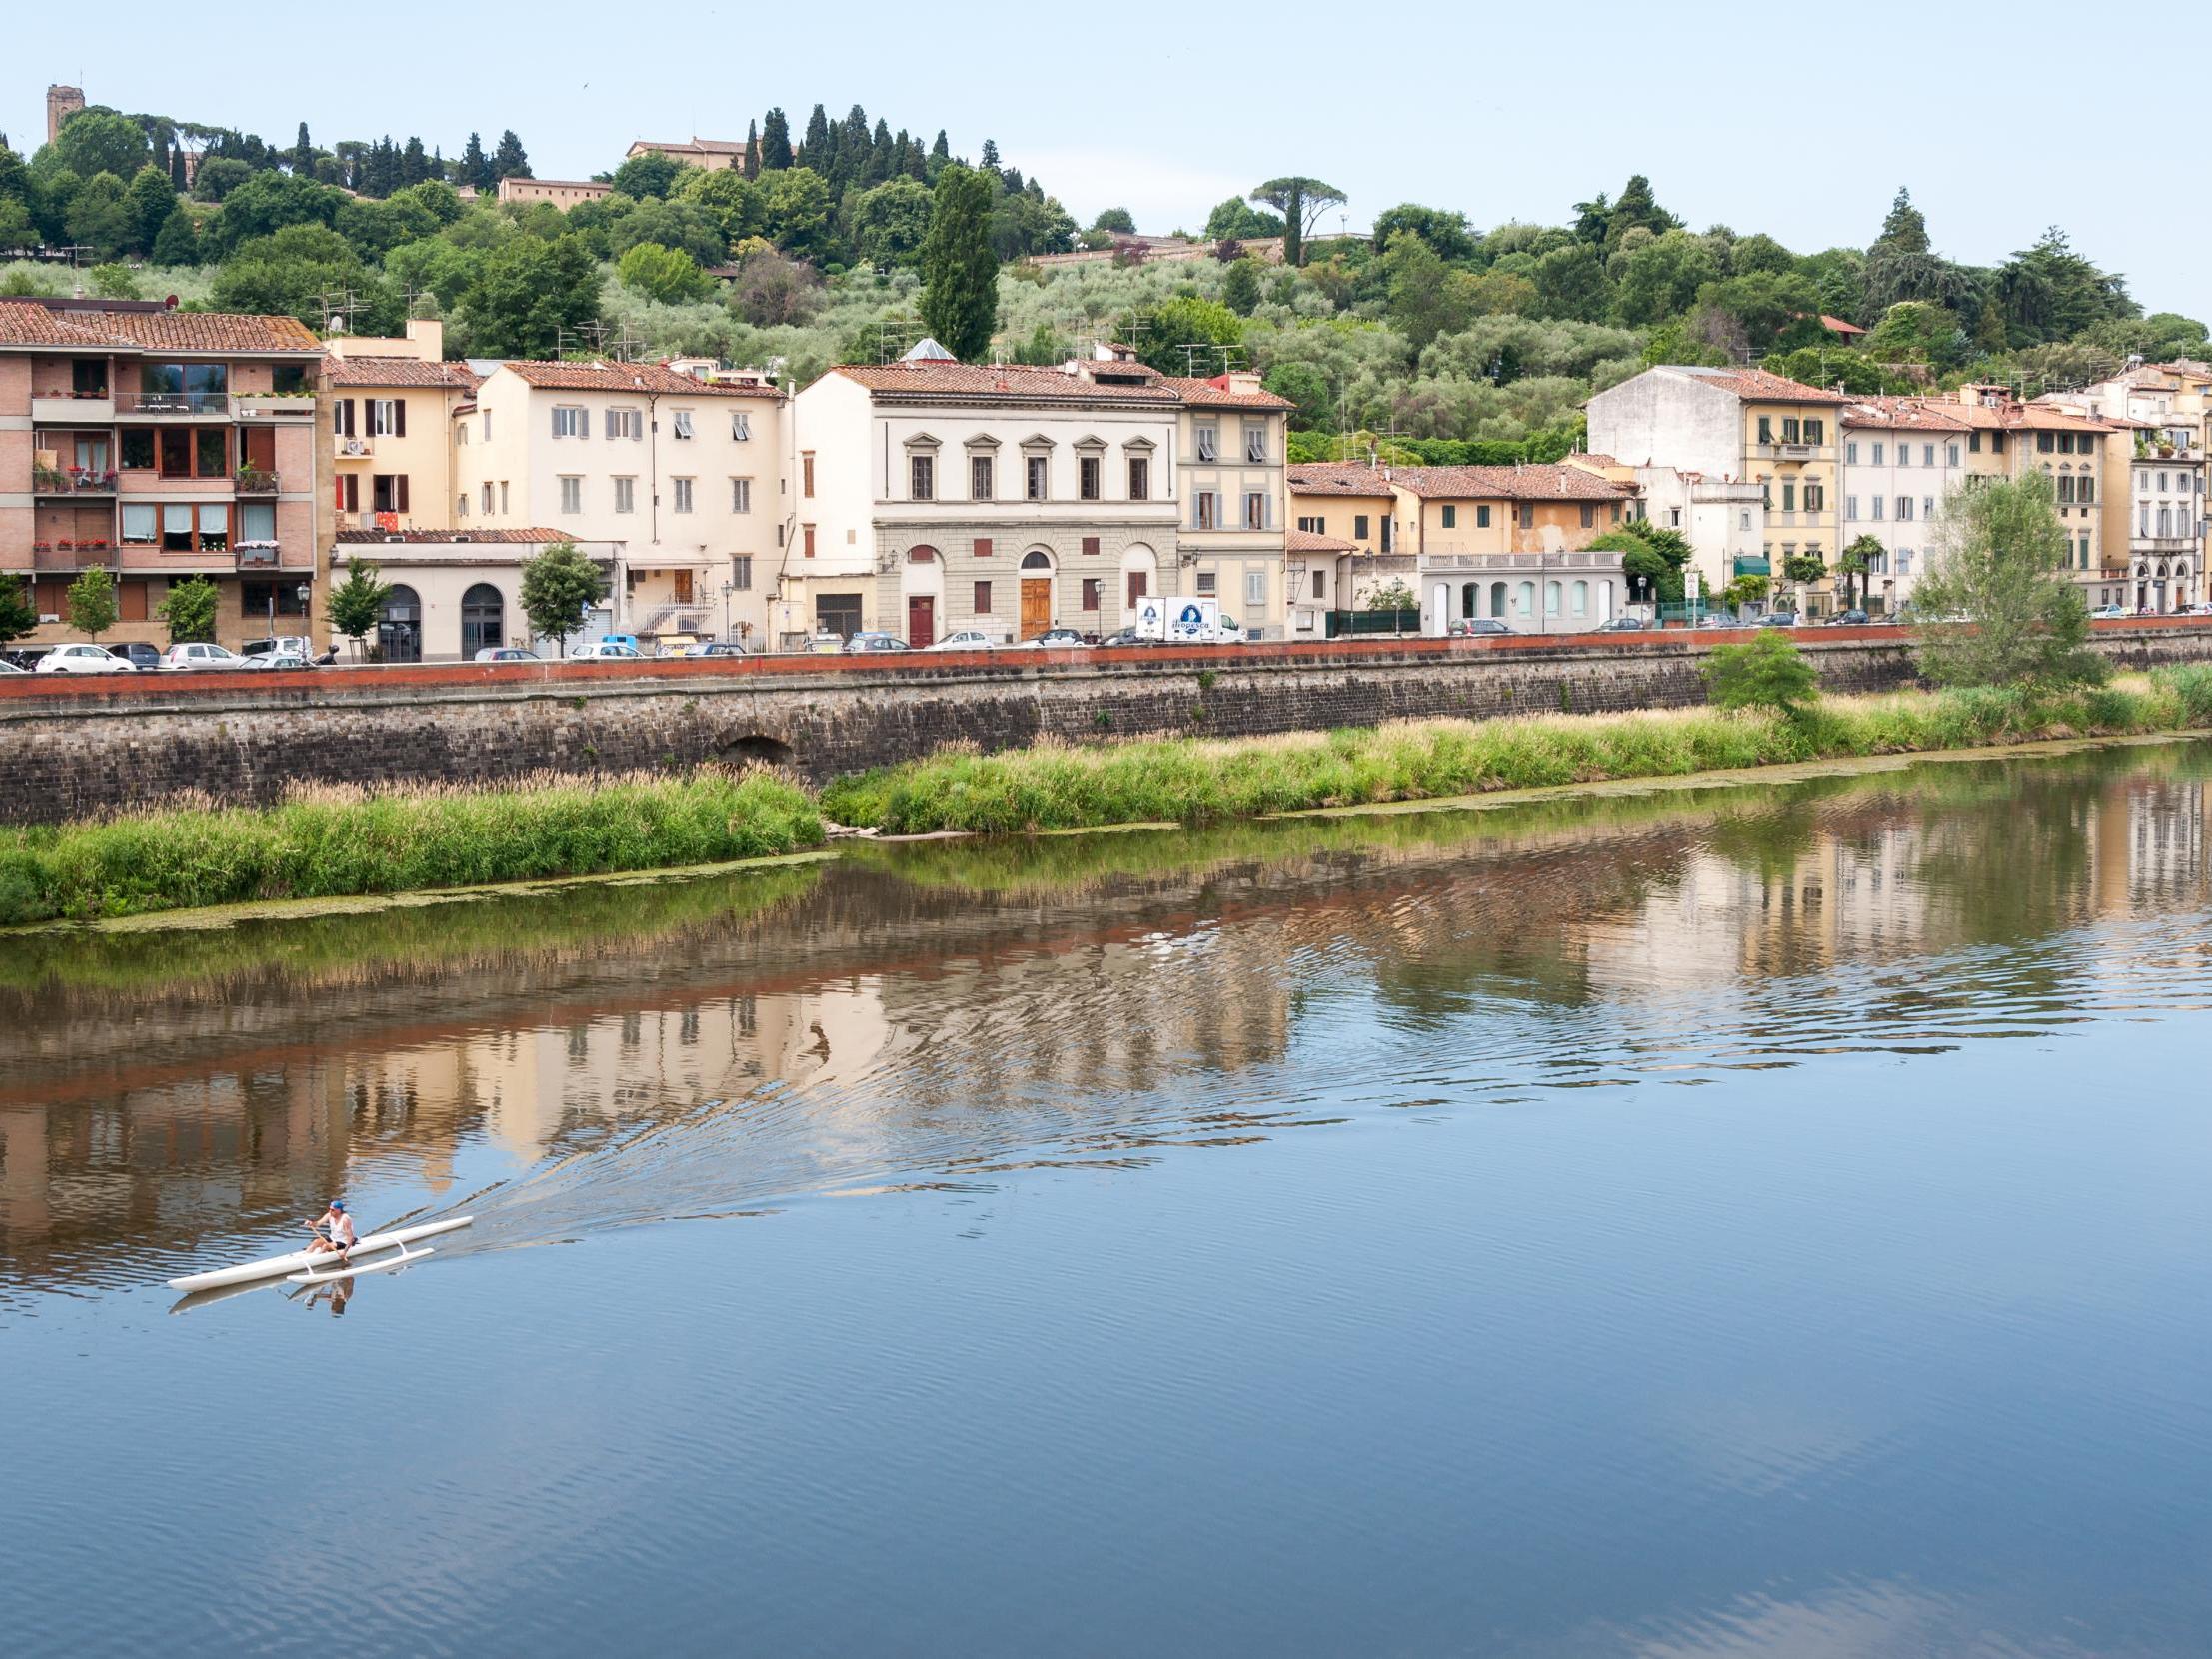 A man rowing a canoe on the Arno river in Florence, Italy